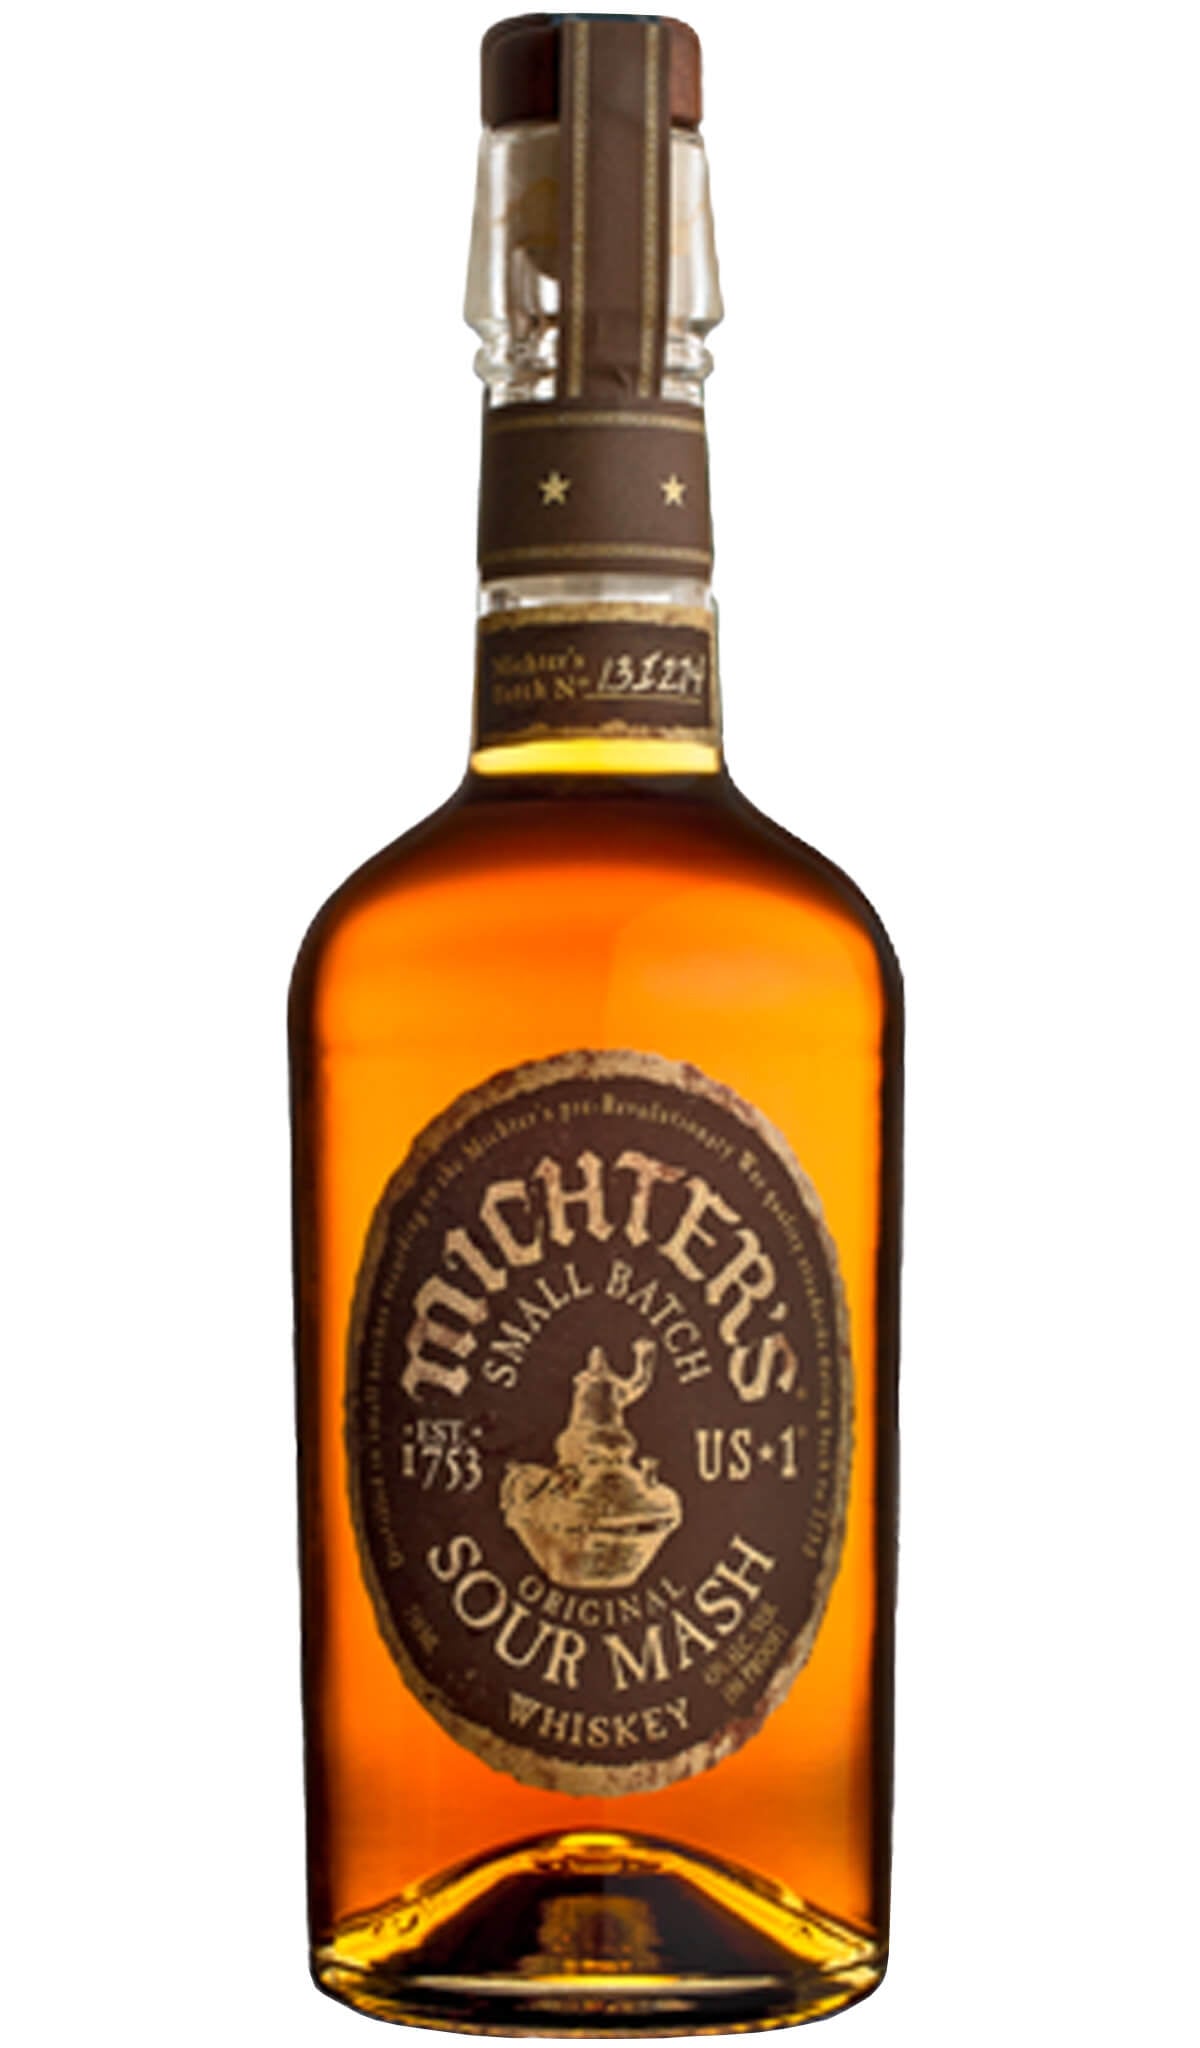 Find out more, explore the range and purchase Michter’s US1 Small Batch Sour Mash Whiskey 700ml available online at Wine Sellers Direct - Australia's independent liquor specialists.